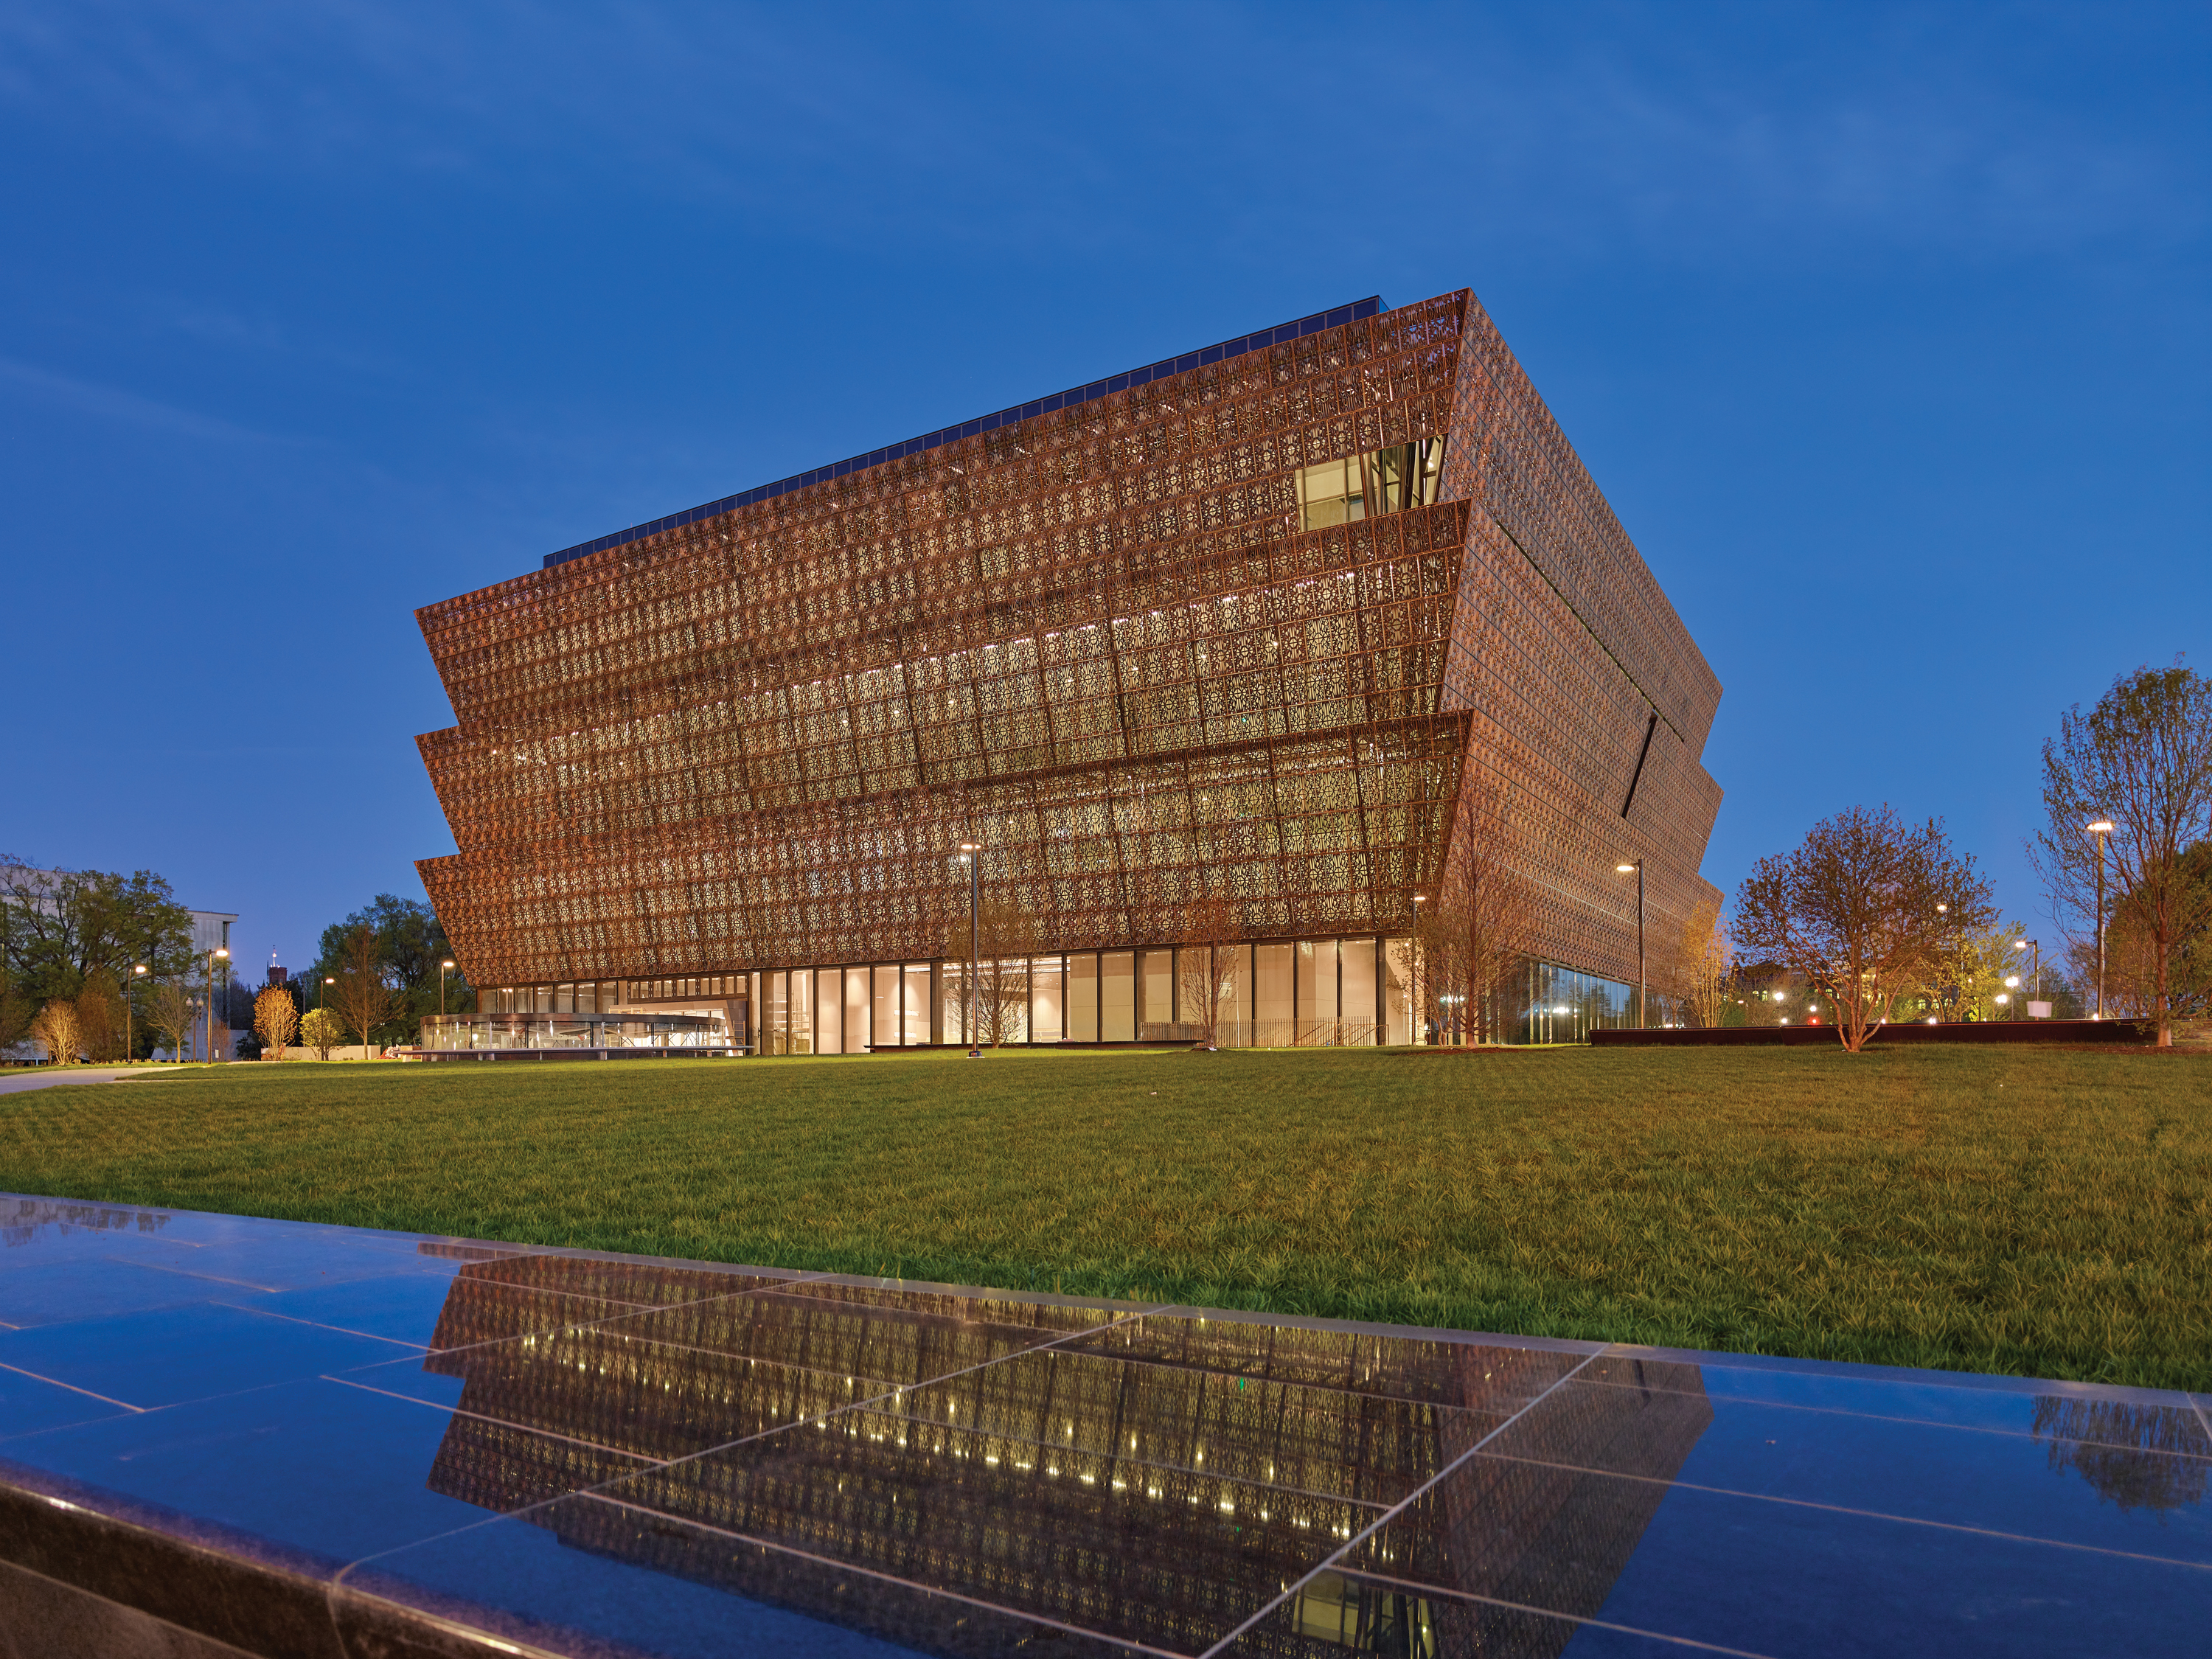 Smithsonian Institution, National Museum of African American History and Culture Architectural Photrography (Alan Karchmer/NMAAHC)